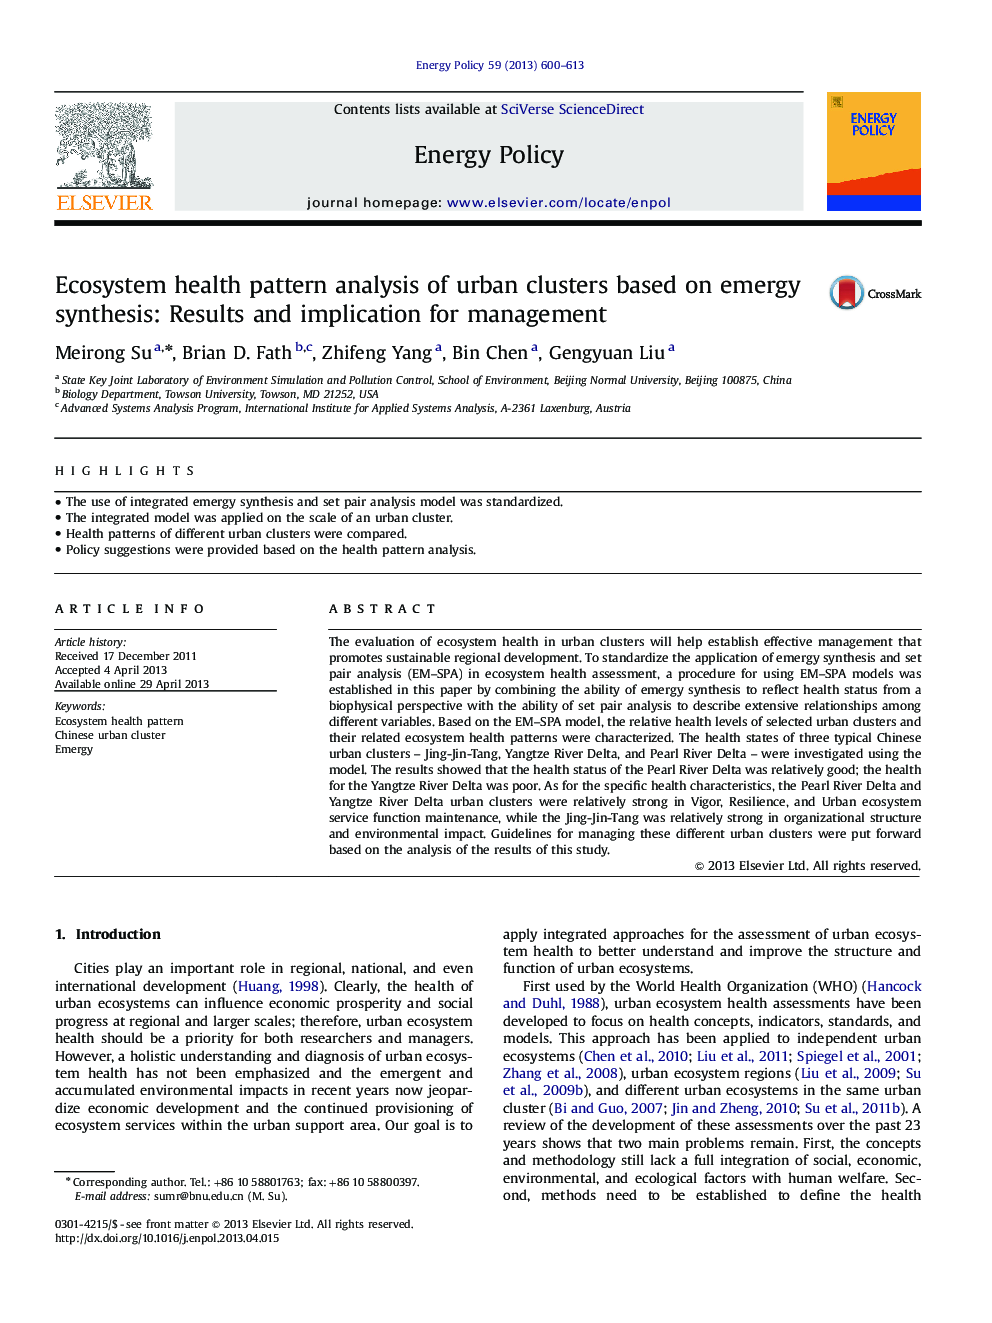 Ecosystem health pattern analysis of urban clusters based on emergy synthesis: Results and implication for management